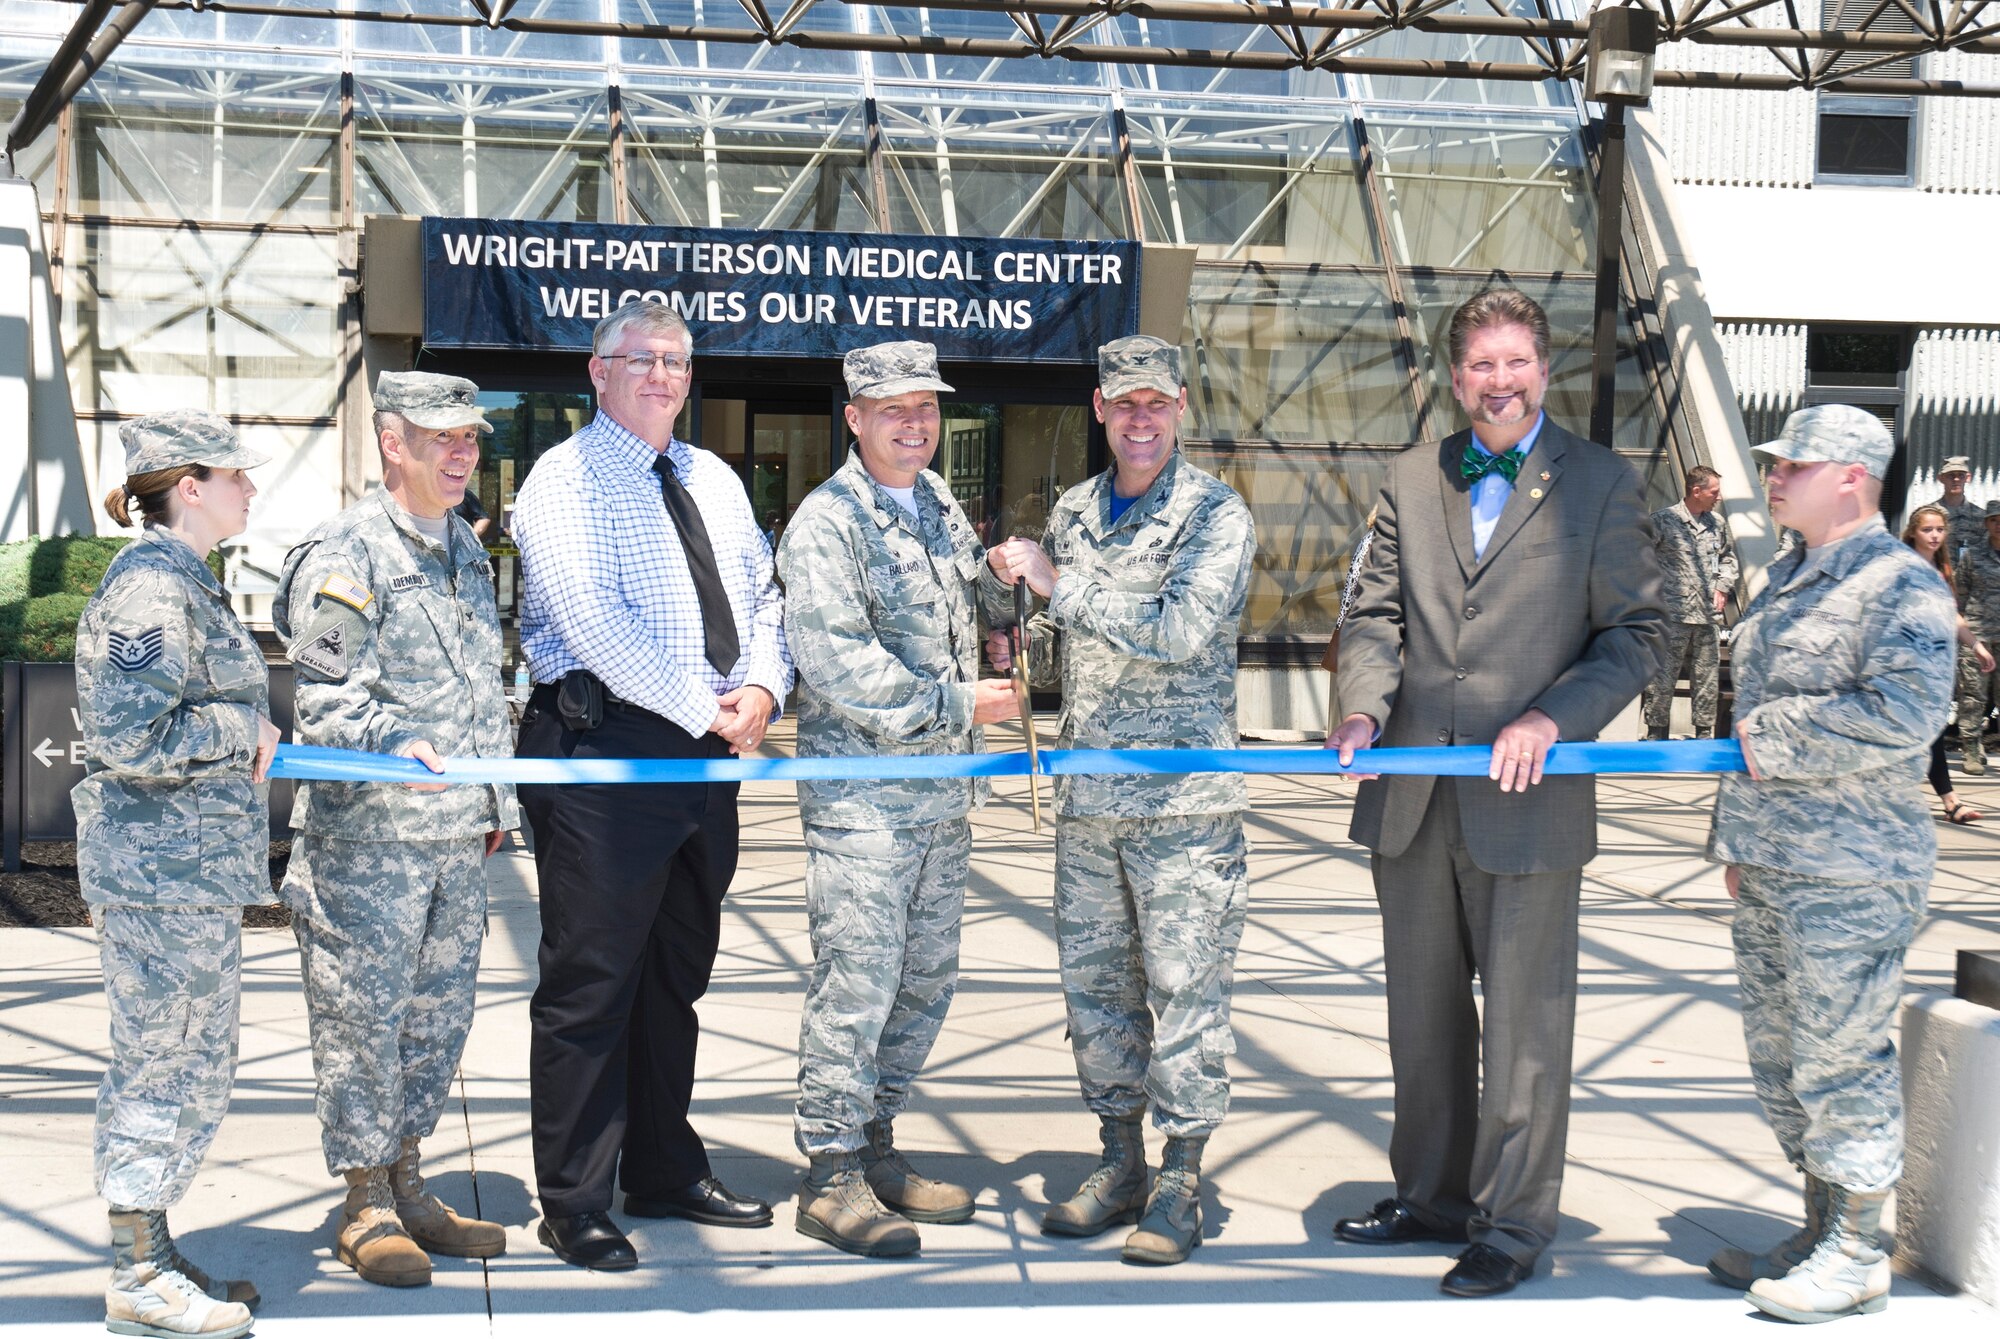 Wright-Patterson Air Force Base Medical Center's Gateway to Health Care III construction project has been completed. Participating in a ribbon-cutting ceremony July 31 (from left): Col. Steve Roembilt, program manager for USA Corps of Engineers; Andy Shirey, 88th Medical Group facility manager; Col. Tim Ballard, 88th Medical Group commander; Col. John Devillier, 88th Air Base Wing commander; and Glenn Costie, CEO, Dayton